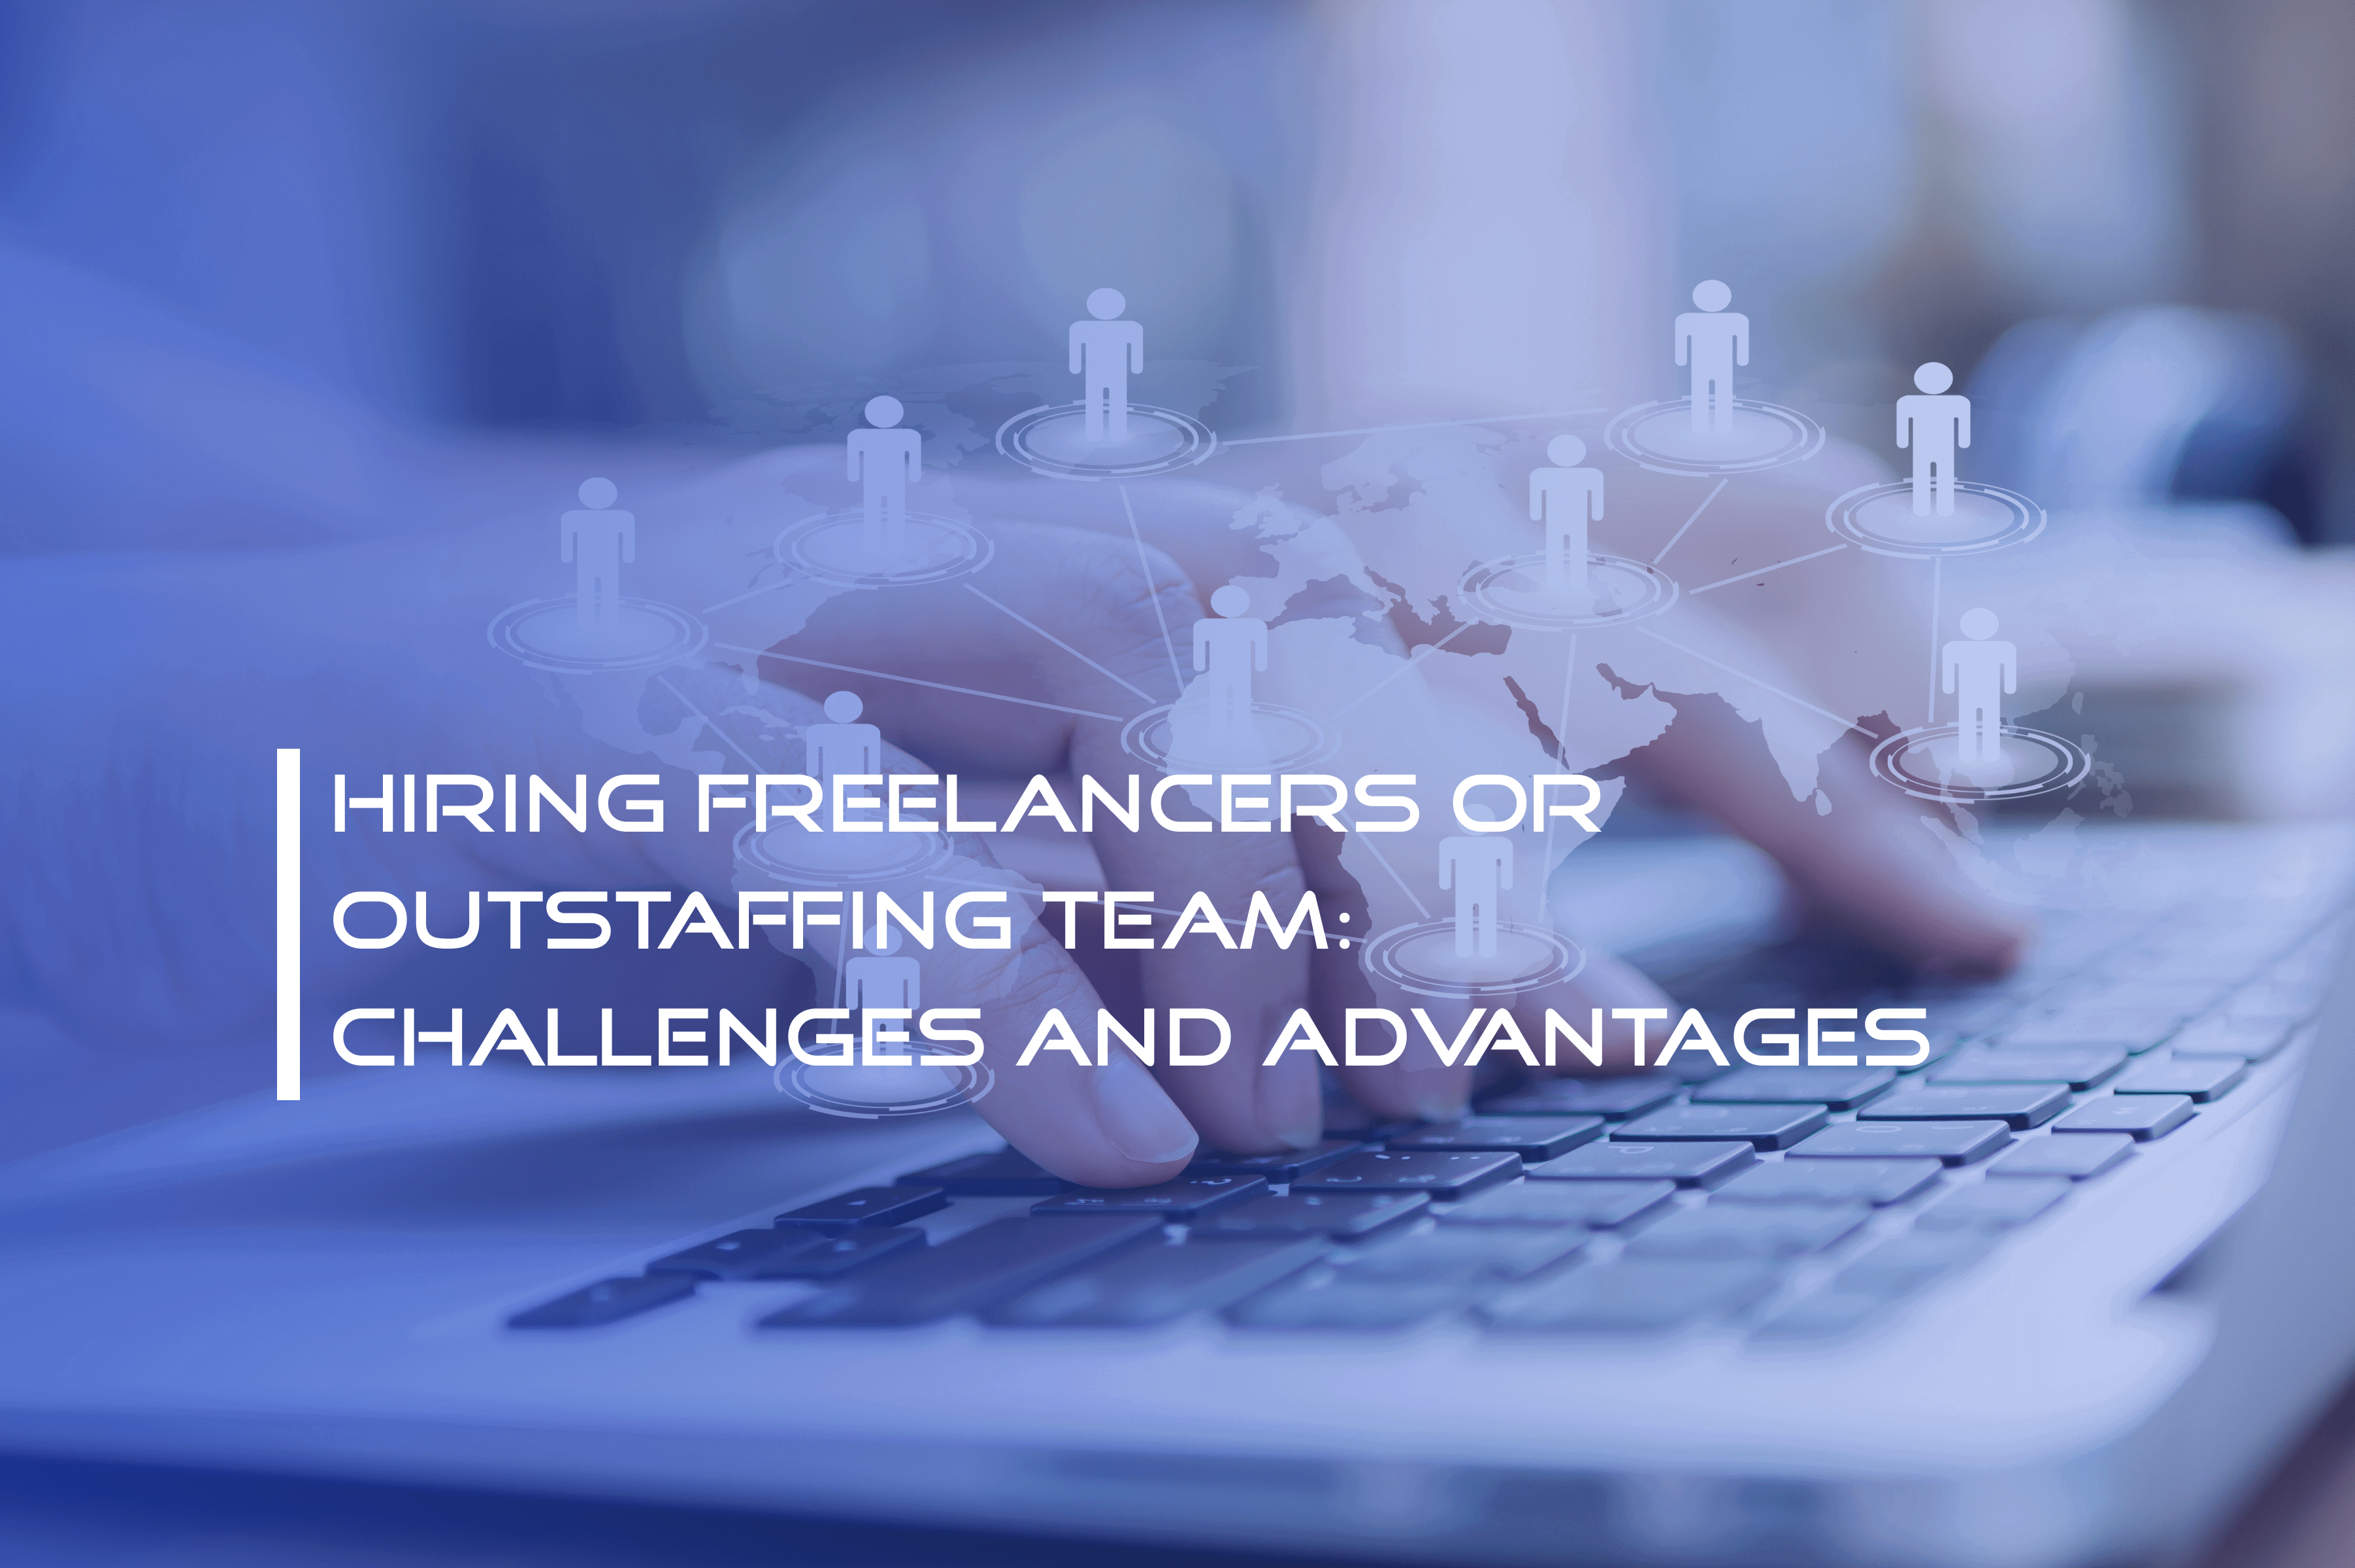 Hiring freelancers or outstaffing team: Challenges & advantages